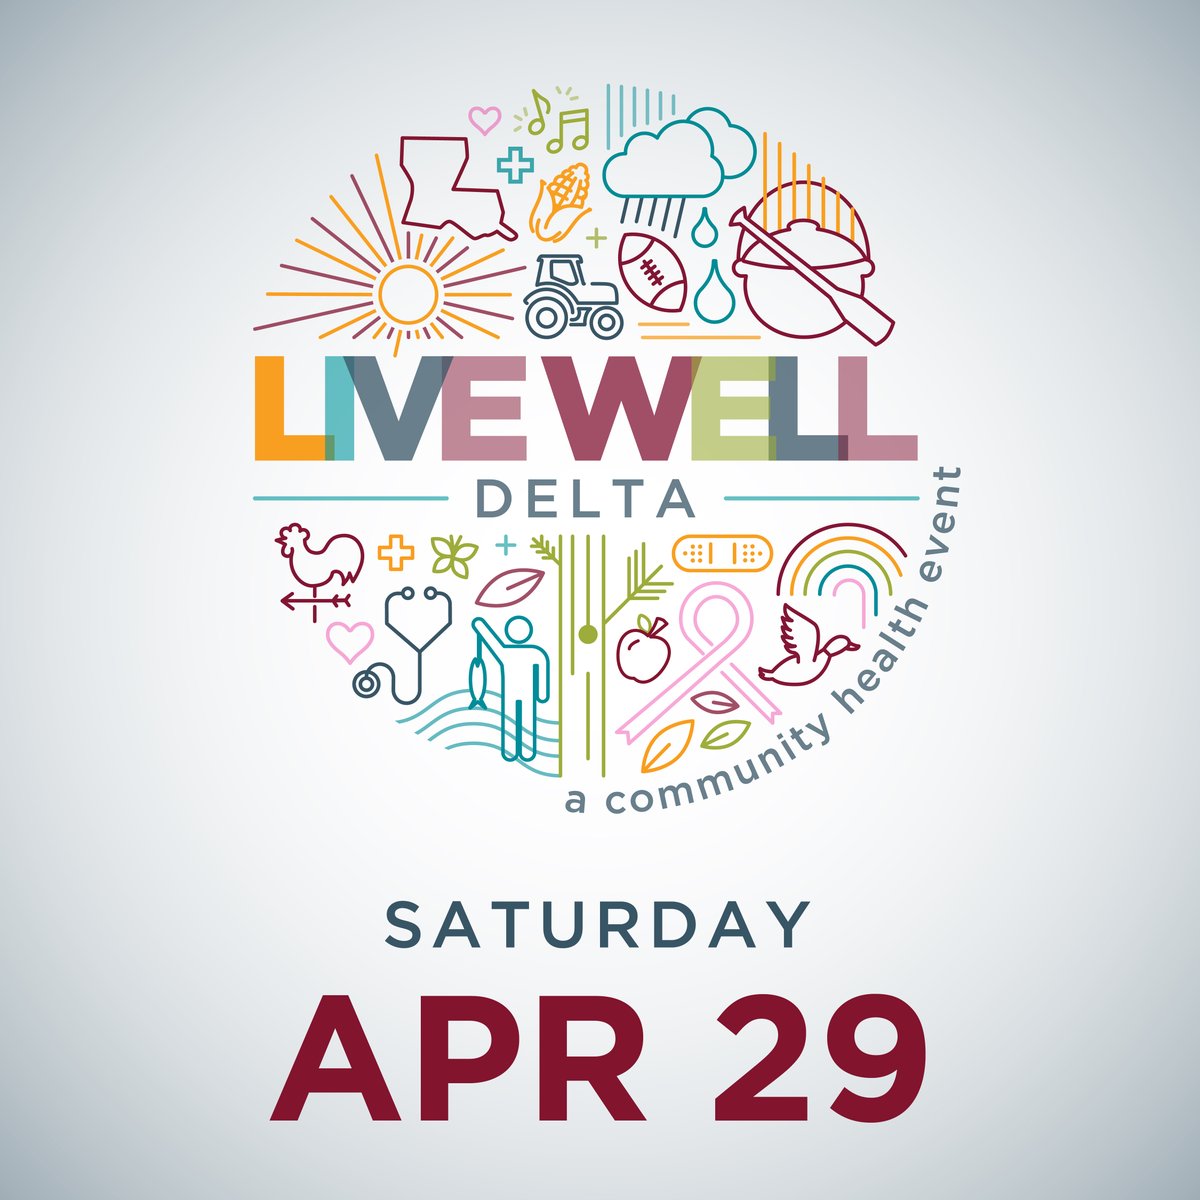 No plans on April 29? Come out to Live Well Delta. Food, music, fun & a perfect opportunity to get your free #cancerscreening! Schedule your appointment and put this one on your calendar now! marybird.org/livewelldelta #cancerprevention #earlydetection